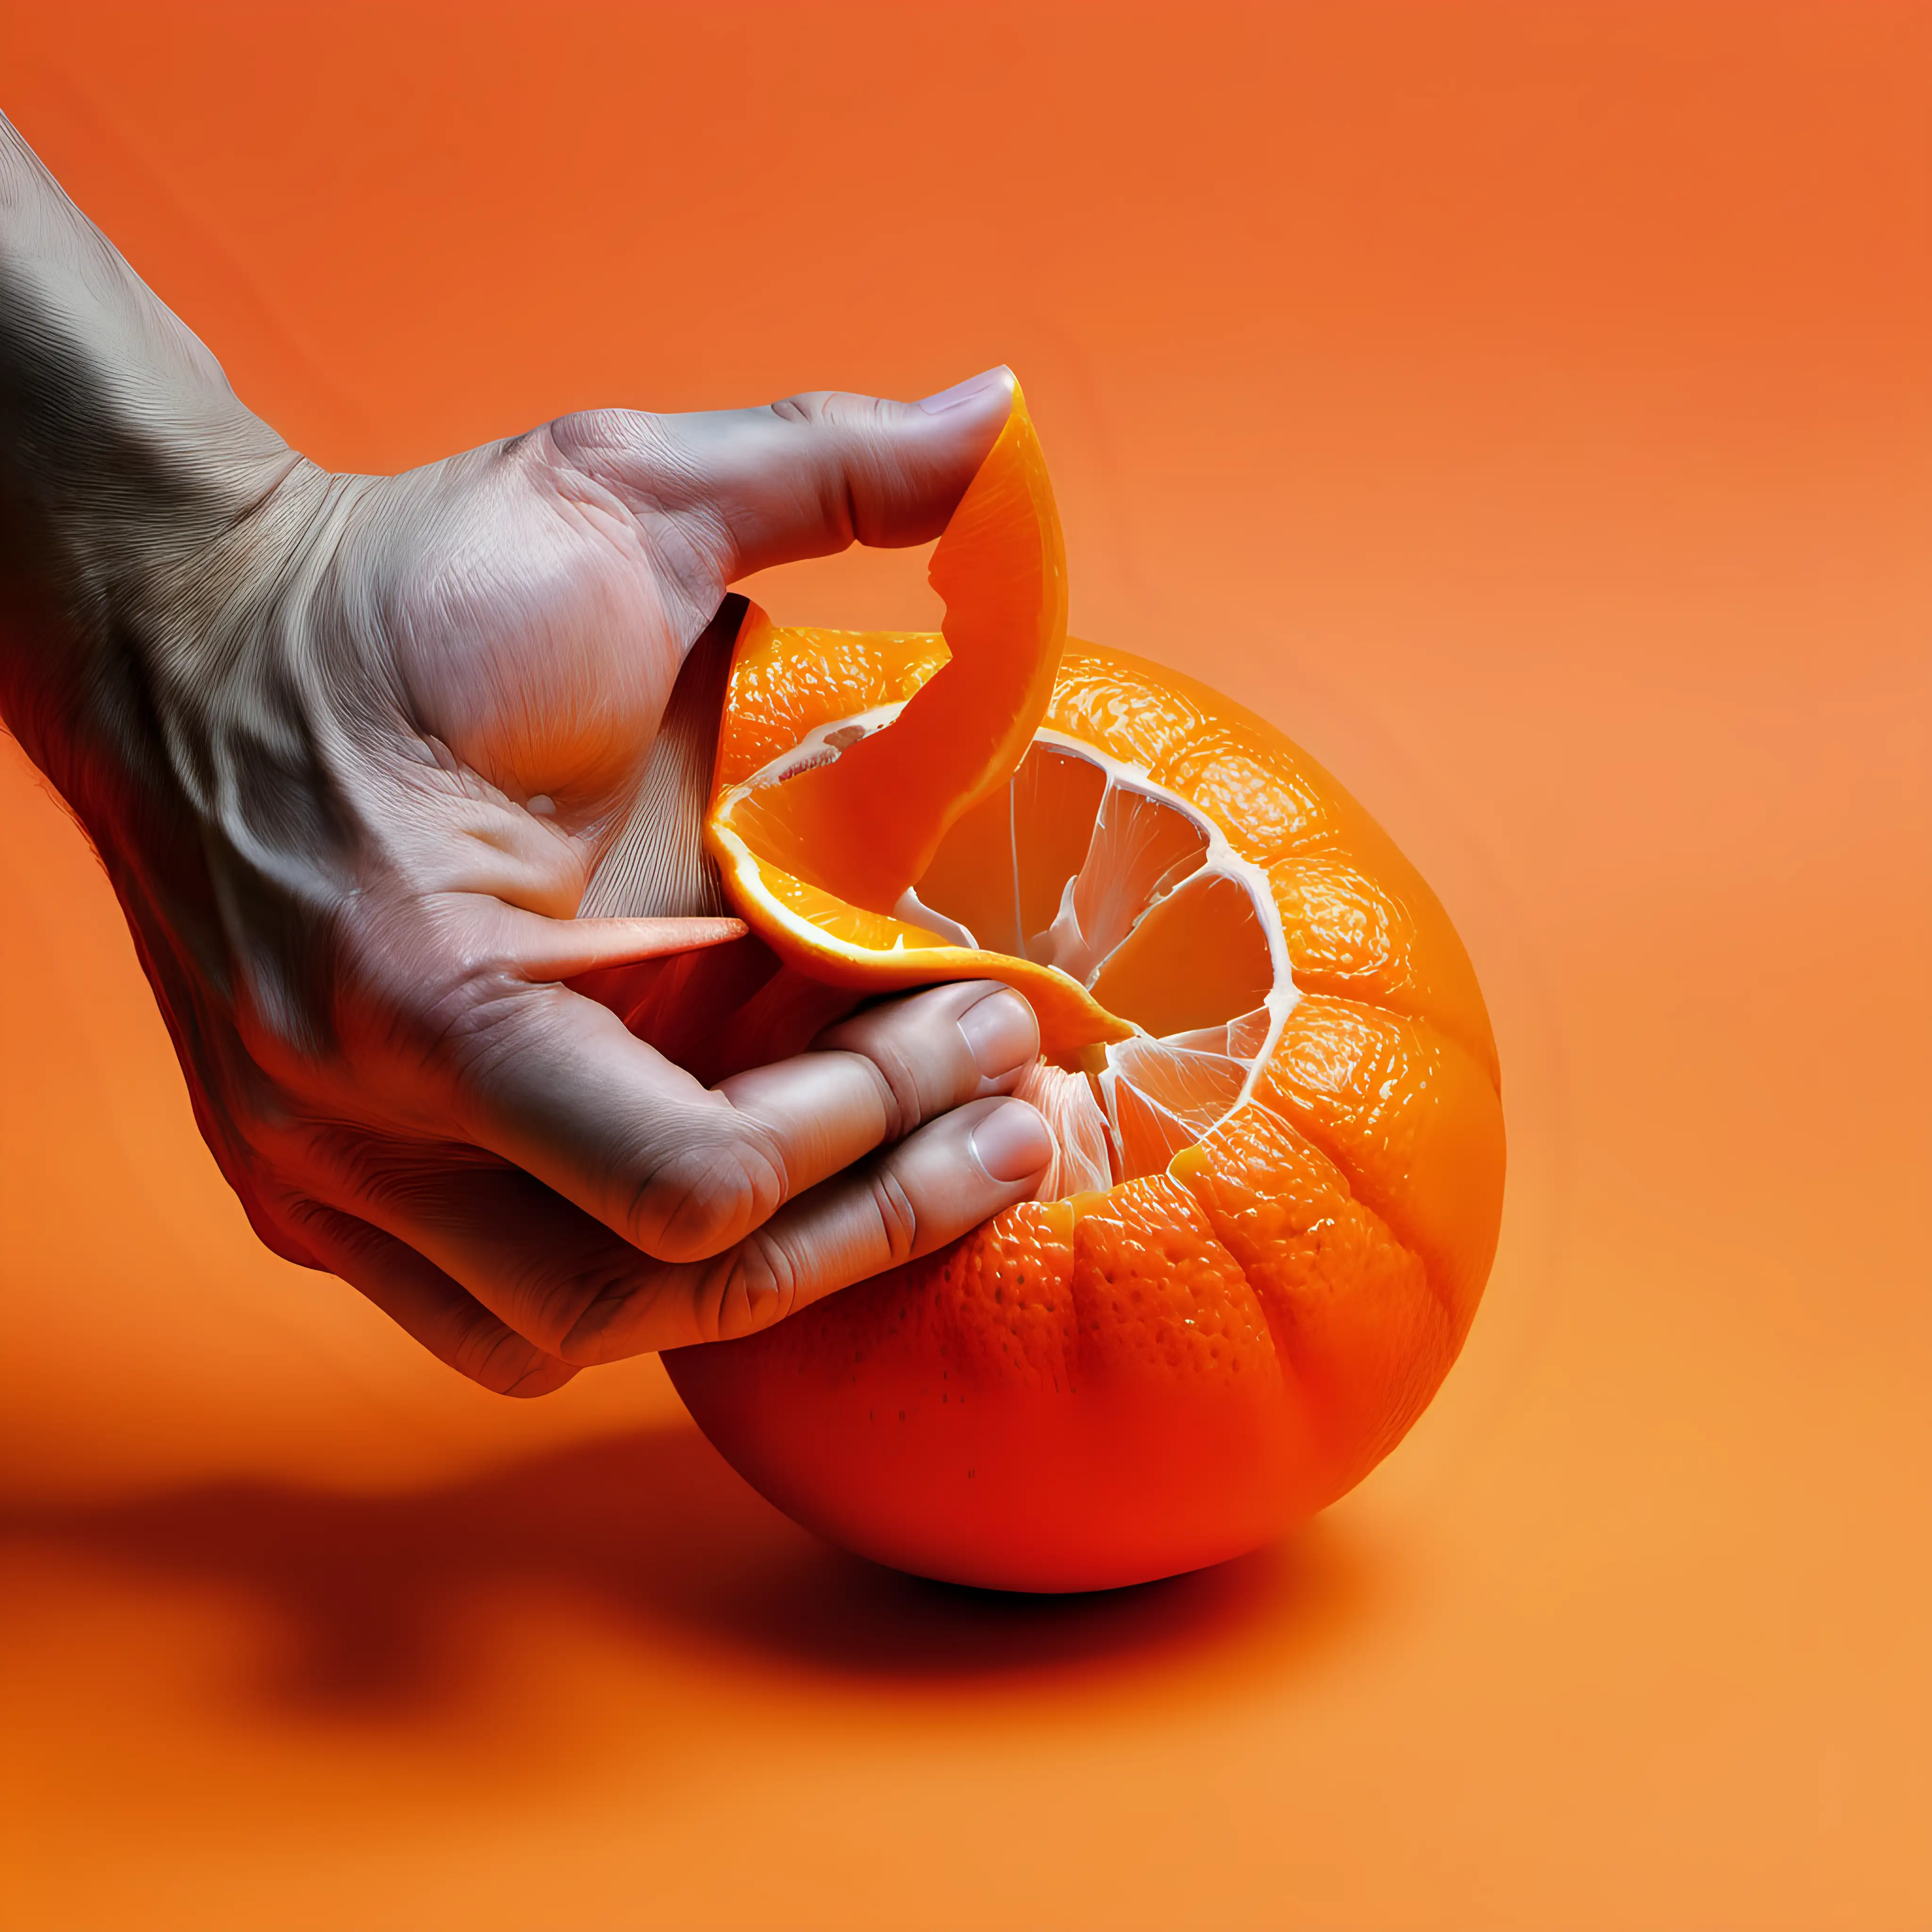 A hand Pealing off a colorful and bright Orange.